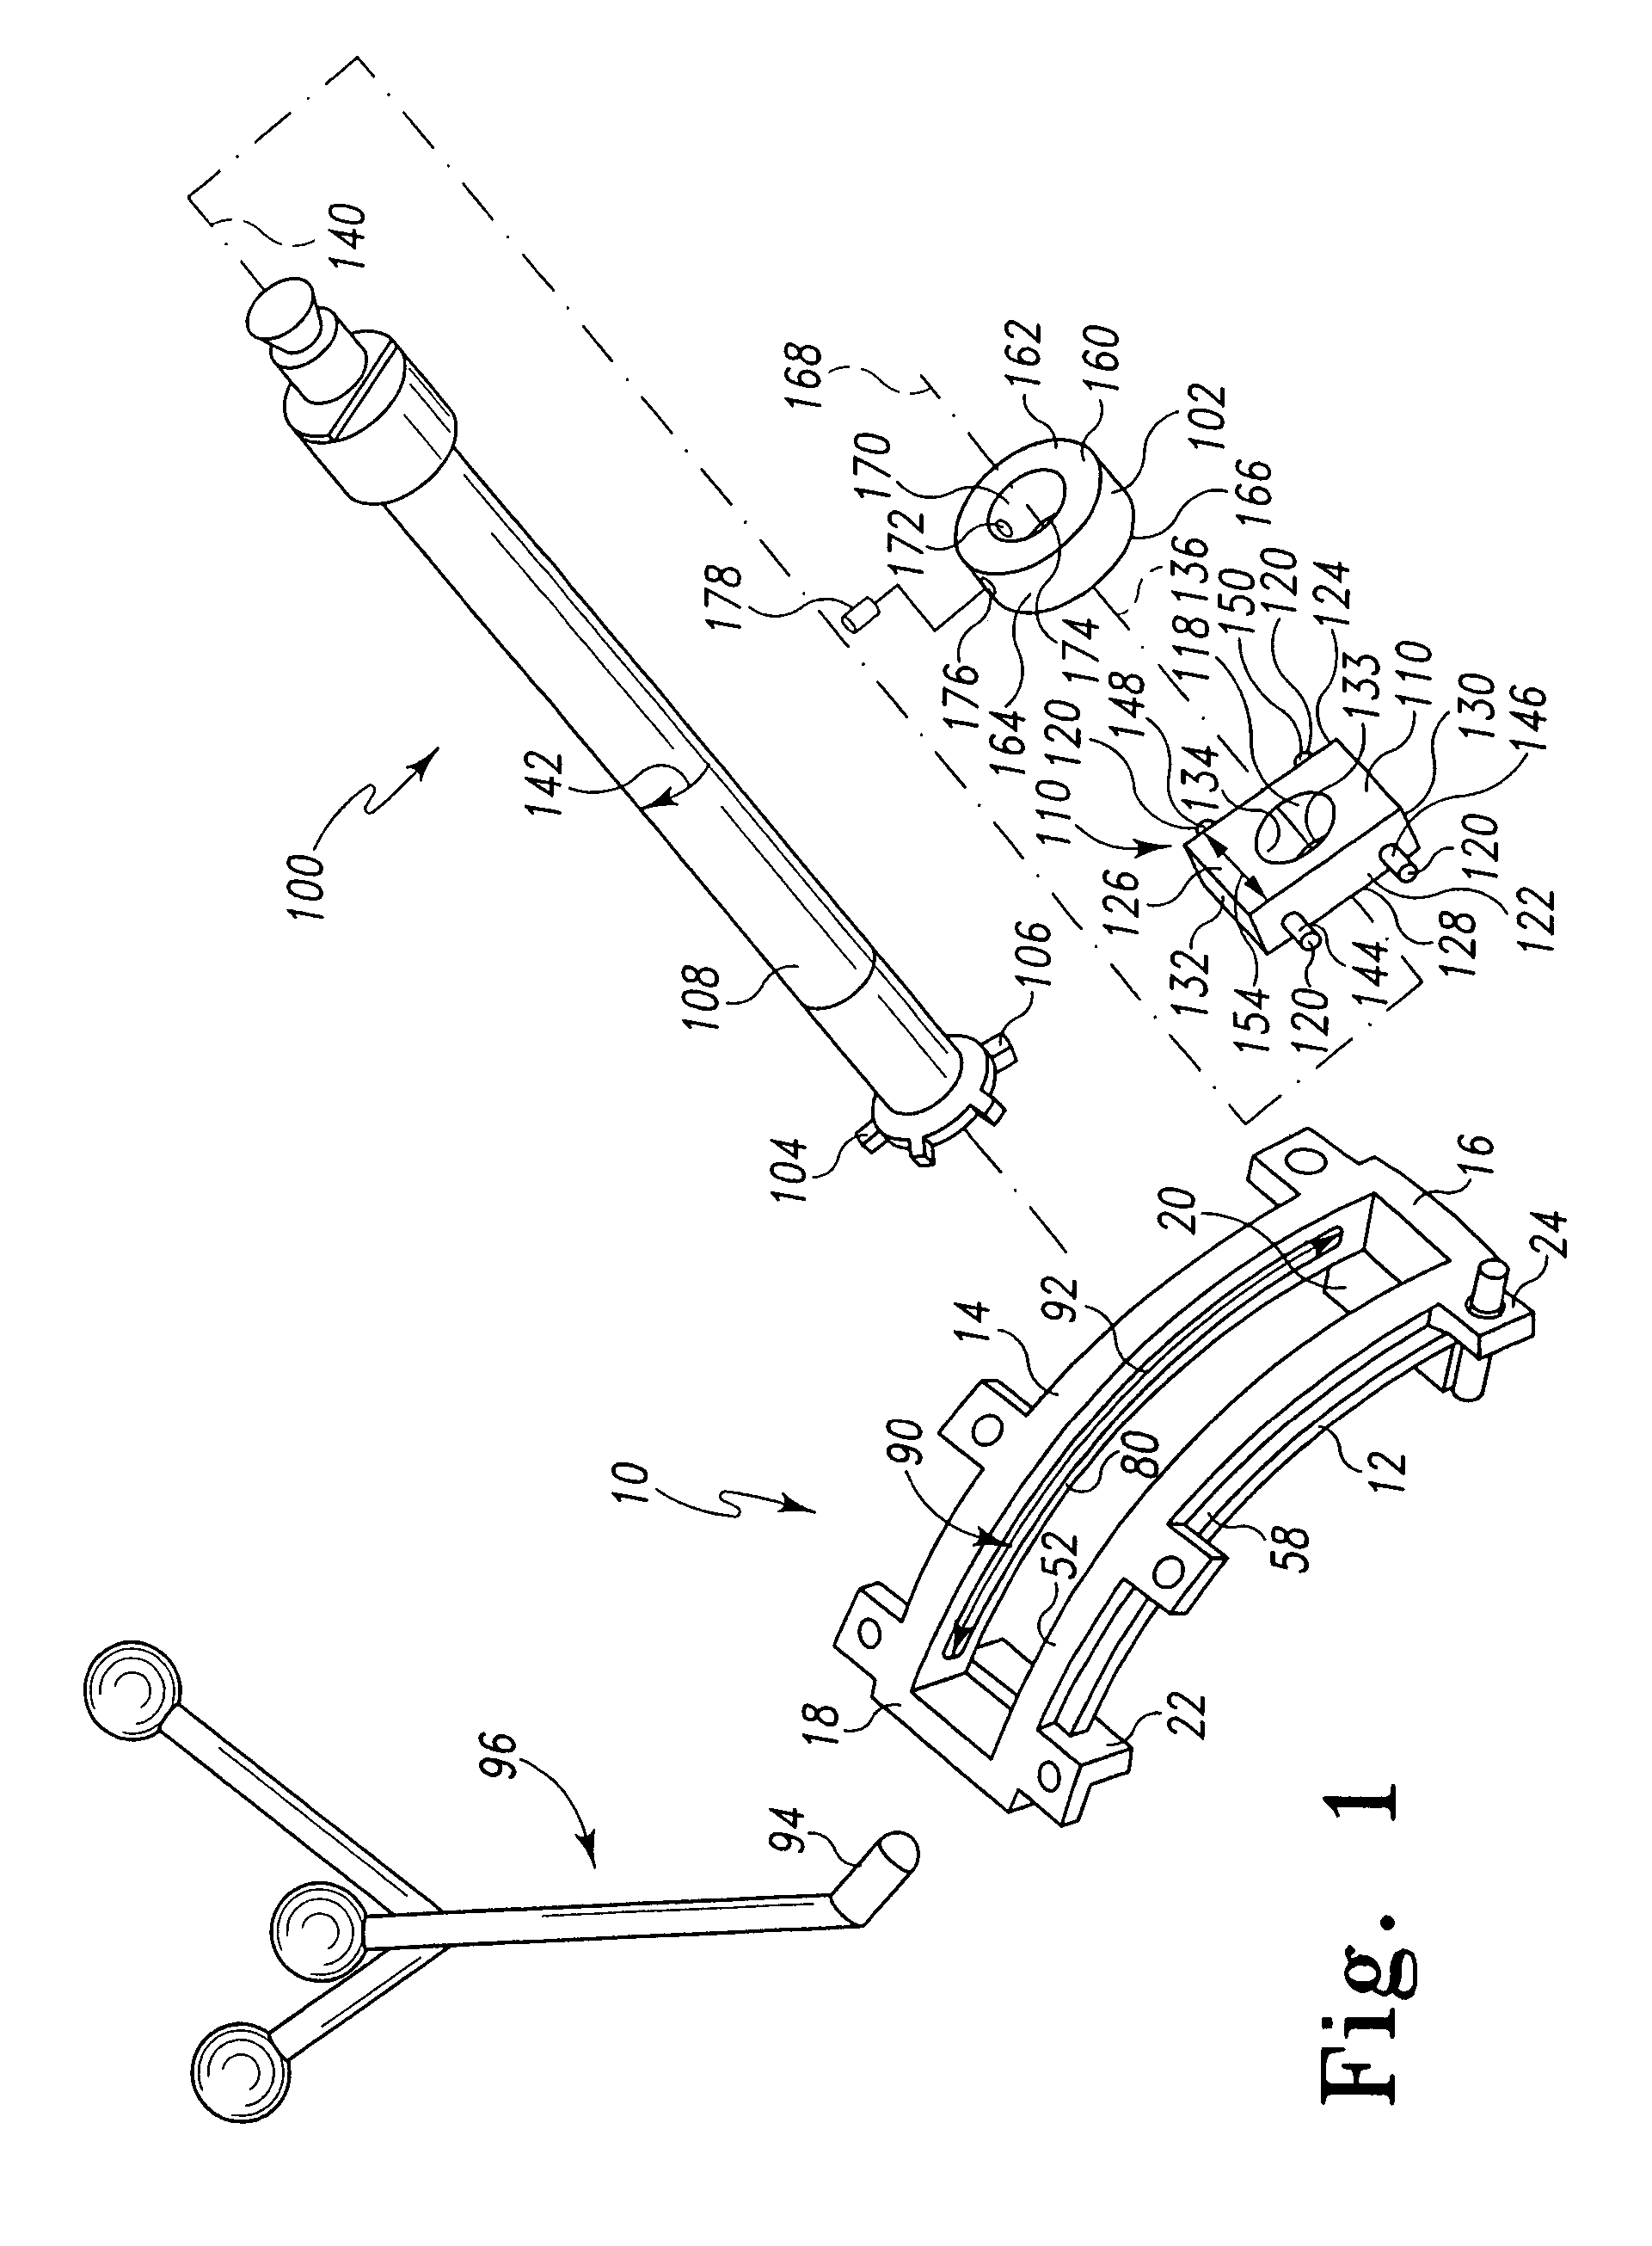 Bone shaping instrument and method for using the same